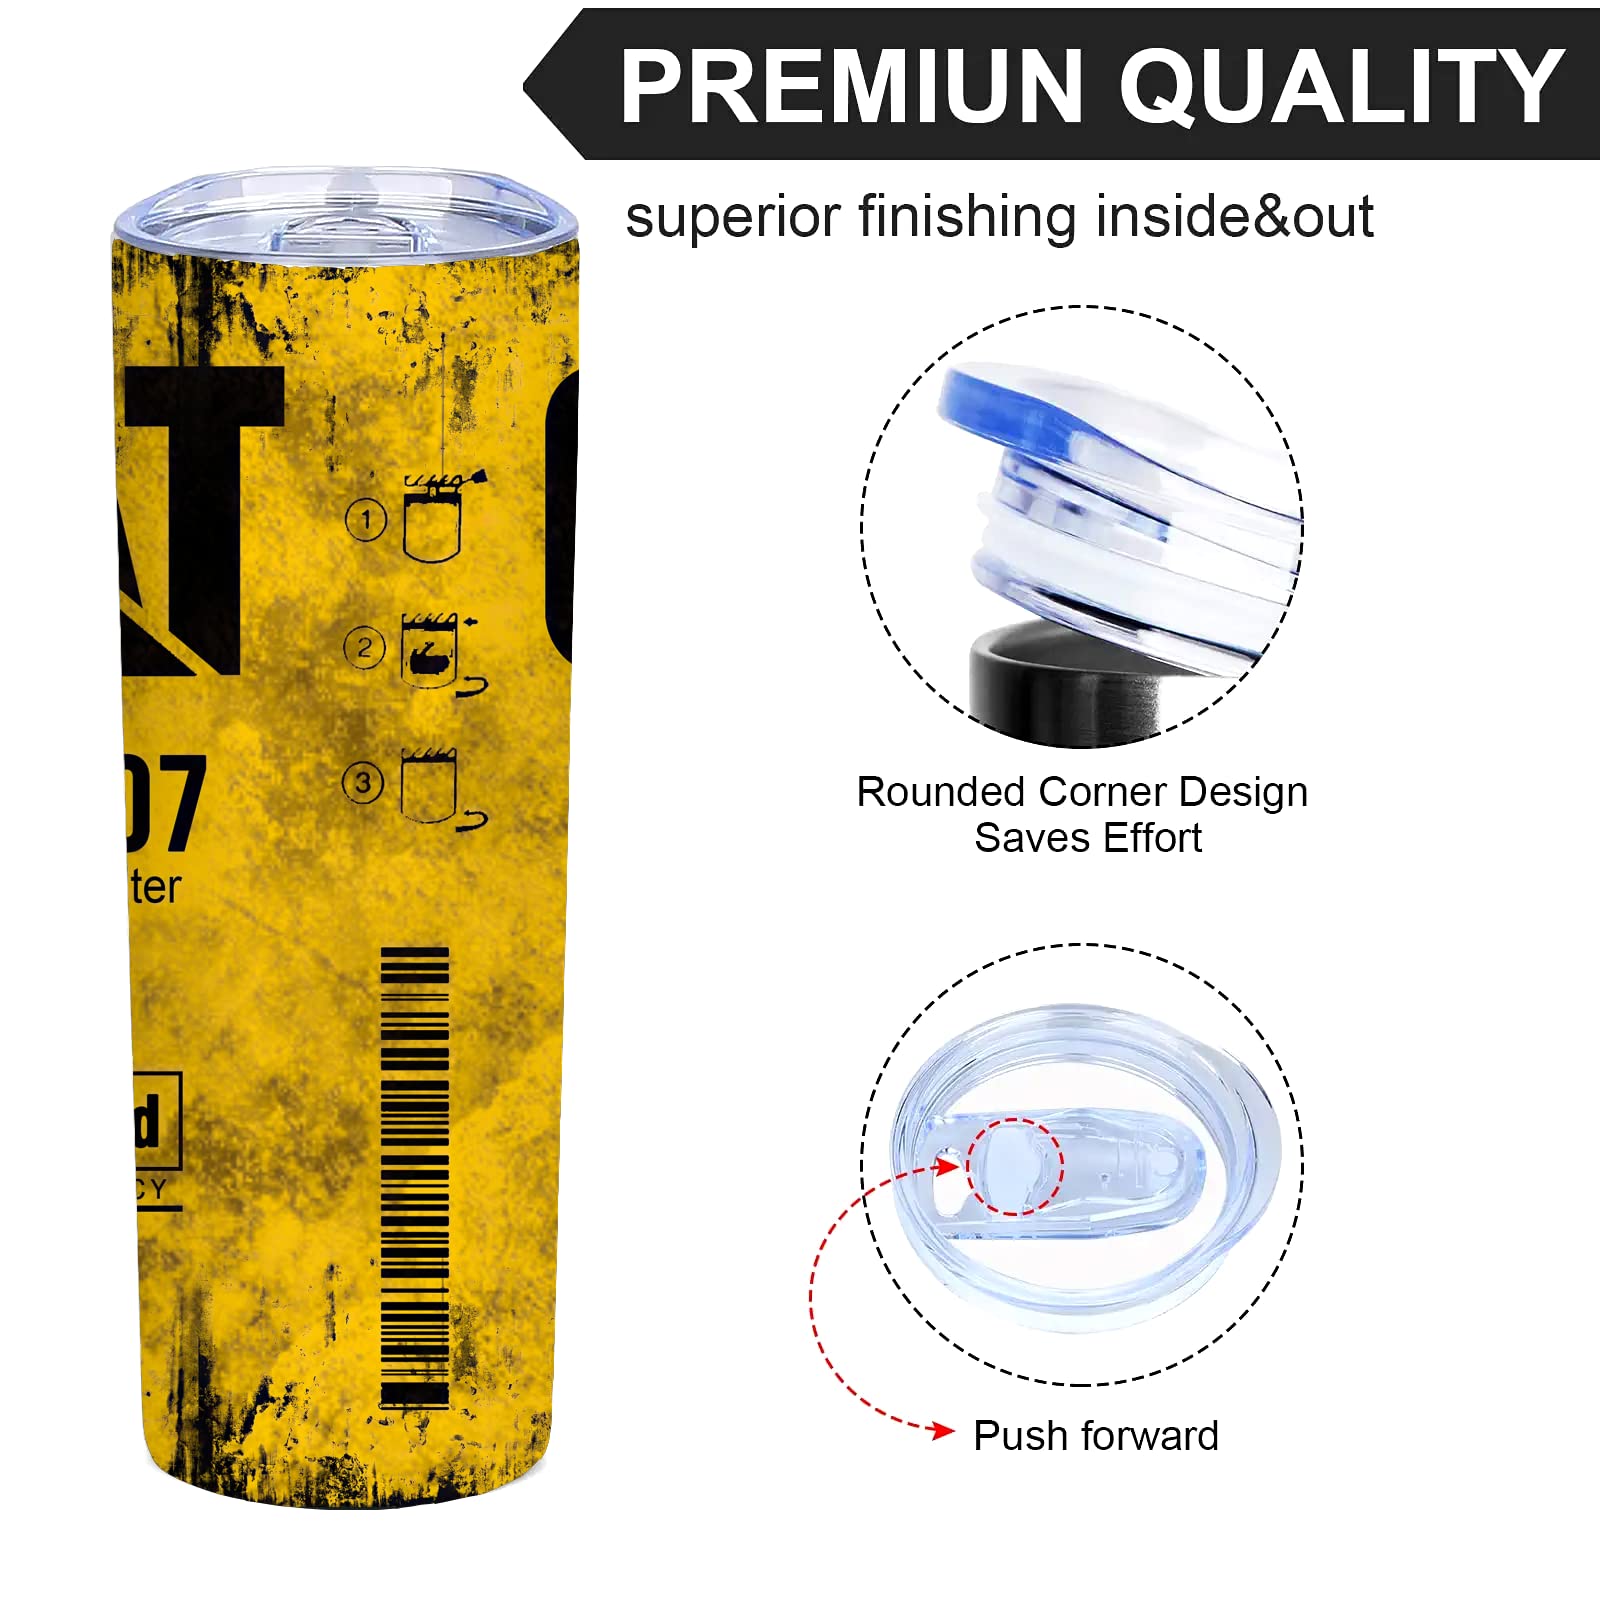 Unique Gifts For Men - Alfaro Yellow CAT 1R 1807 Engine Oil Filter Skinny Tumbler with Lid, Stainless Steel Double Wall Cups, Insulated Travel Coffee Mug